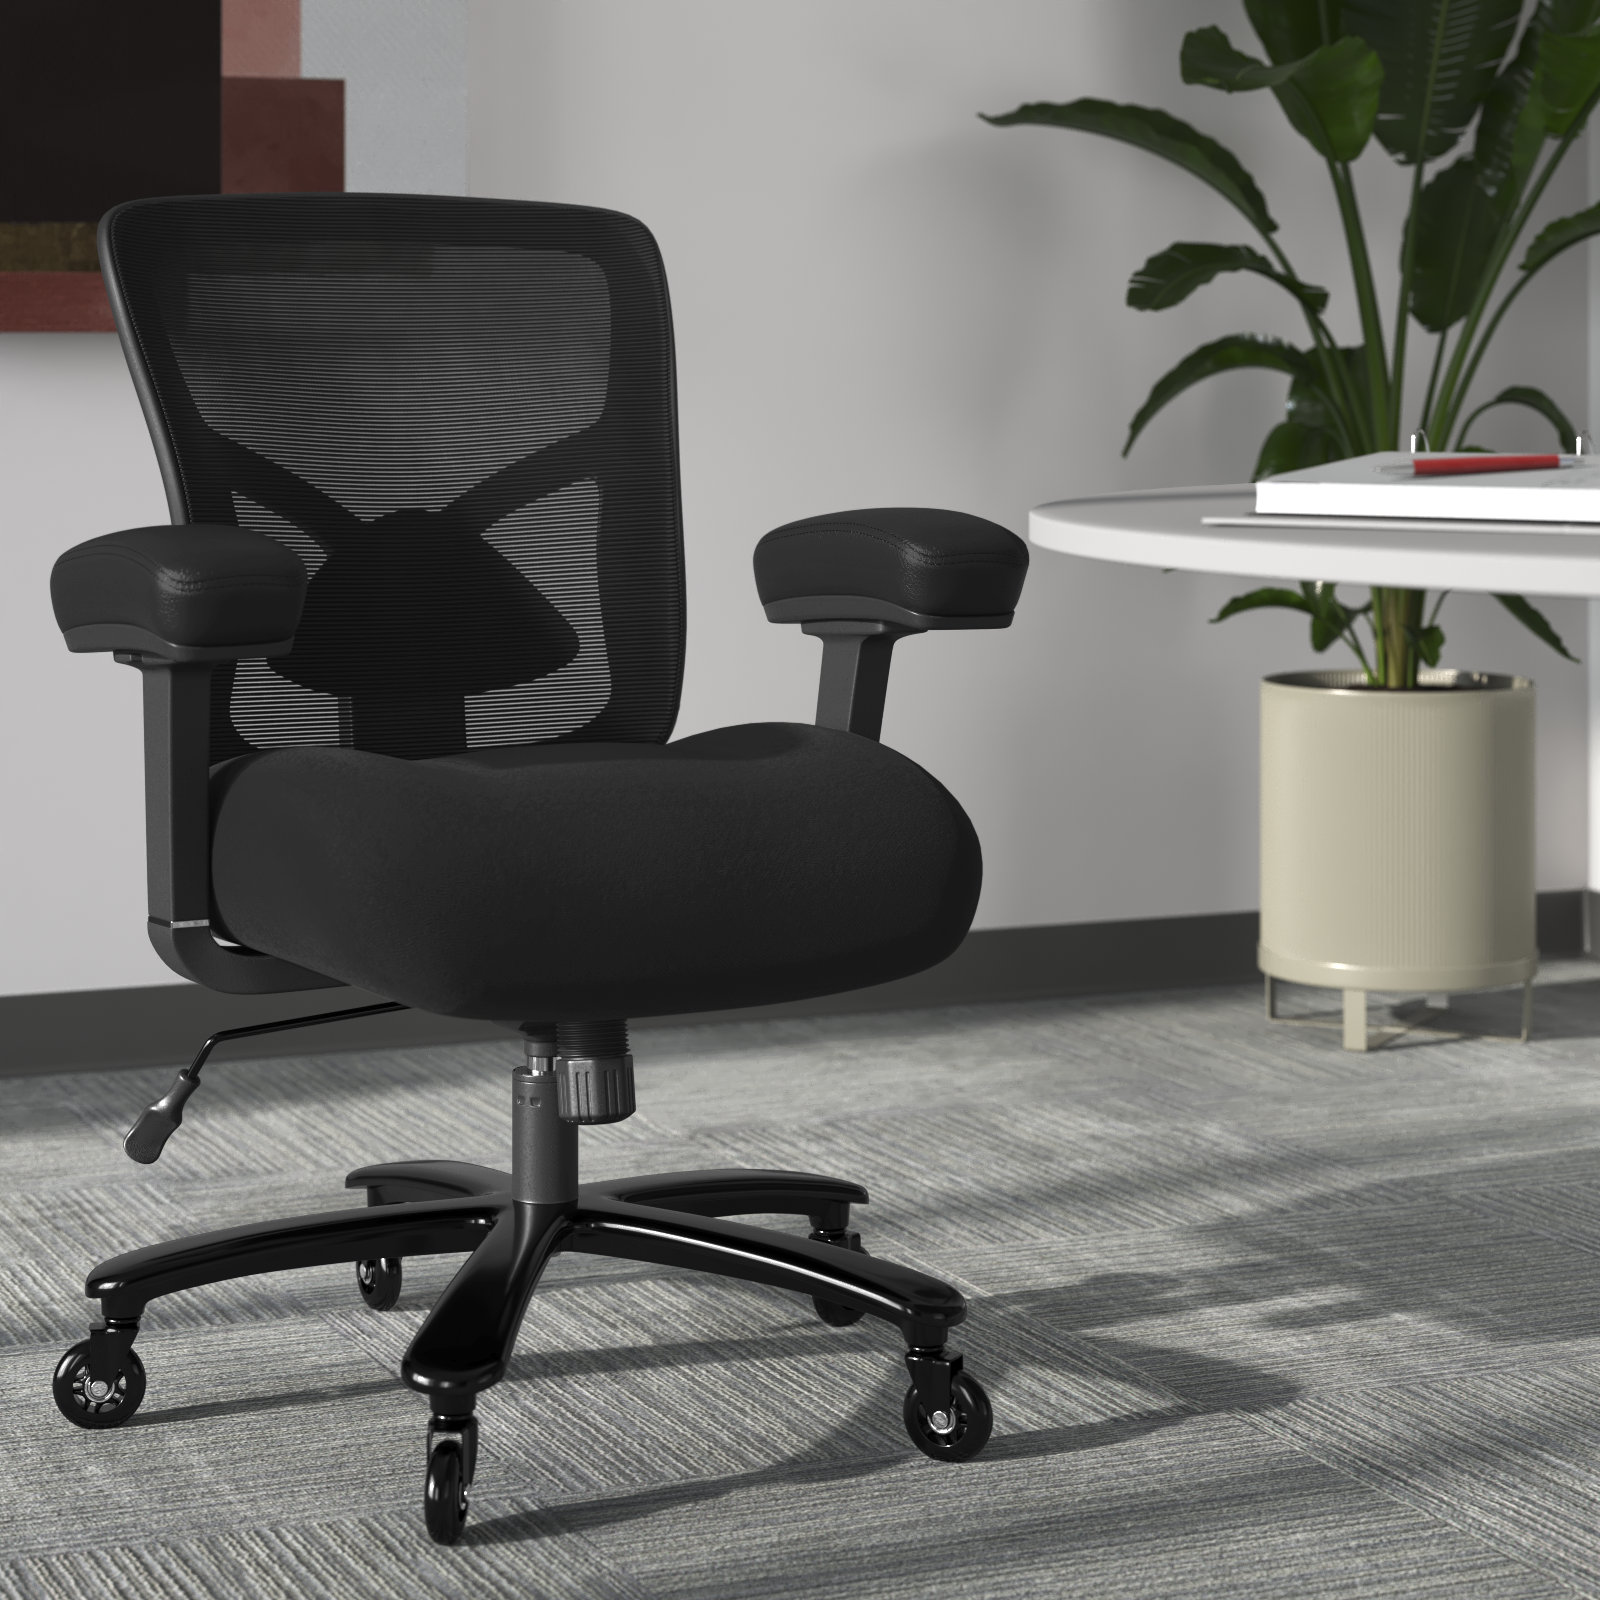 Ergonomic Chair - Fully Adjustable For Home Or Office